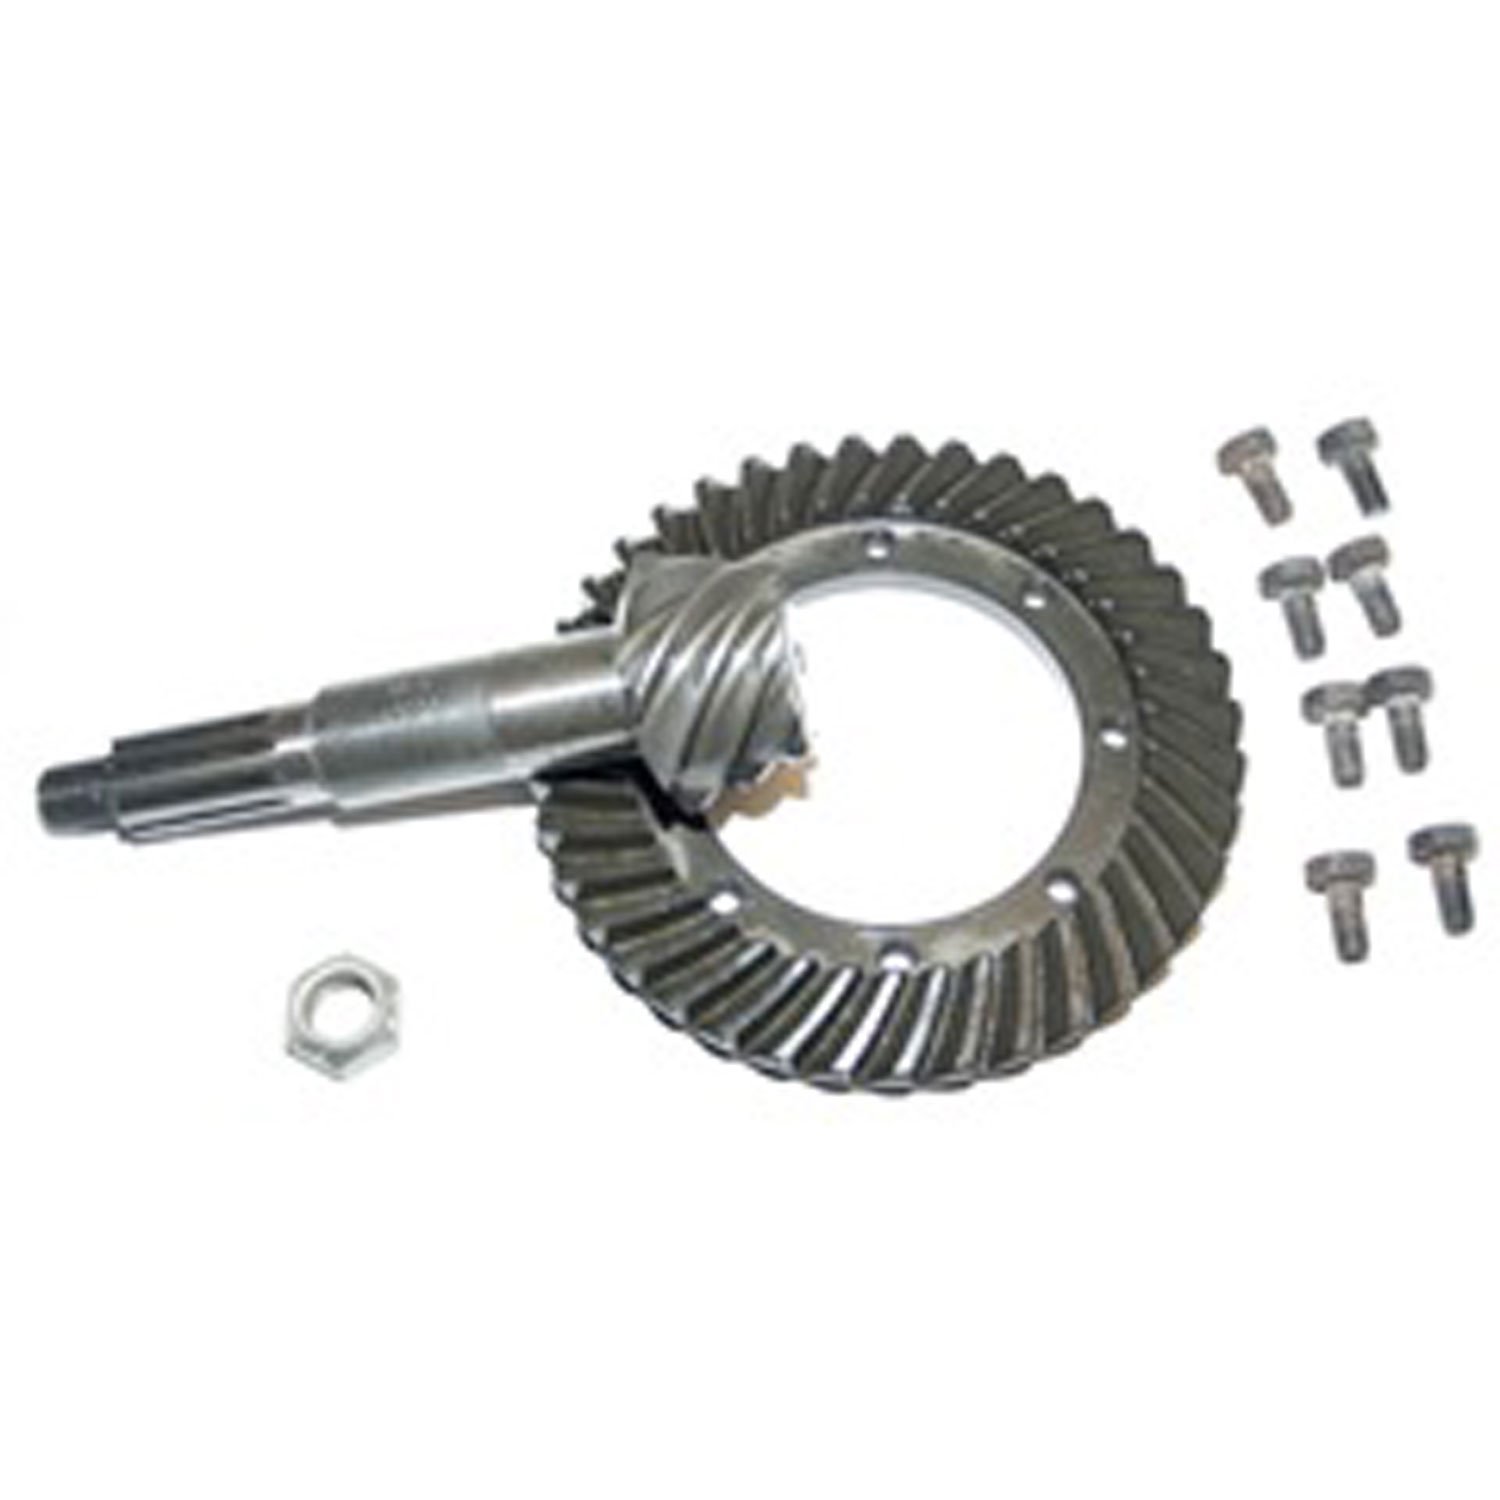 This 4.88 ratio ring and pinion set from Omix-ADA for Dana 25 front axle found in 41-64 Willys models.